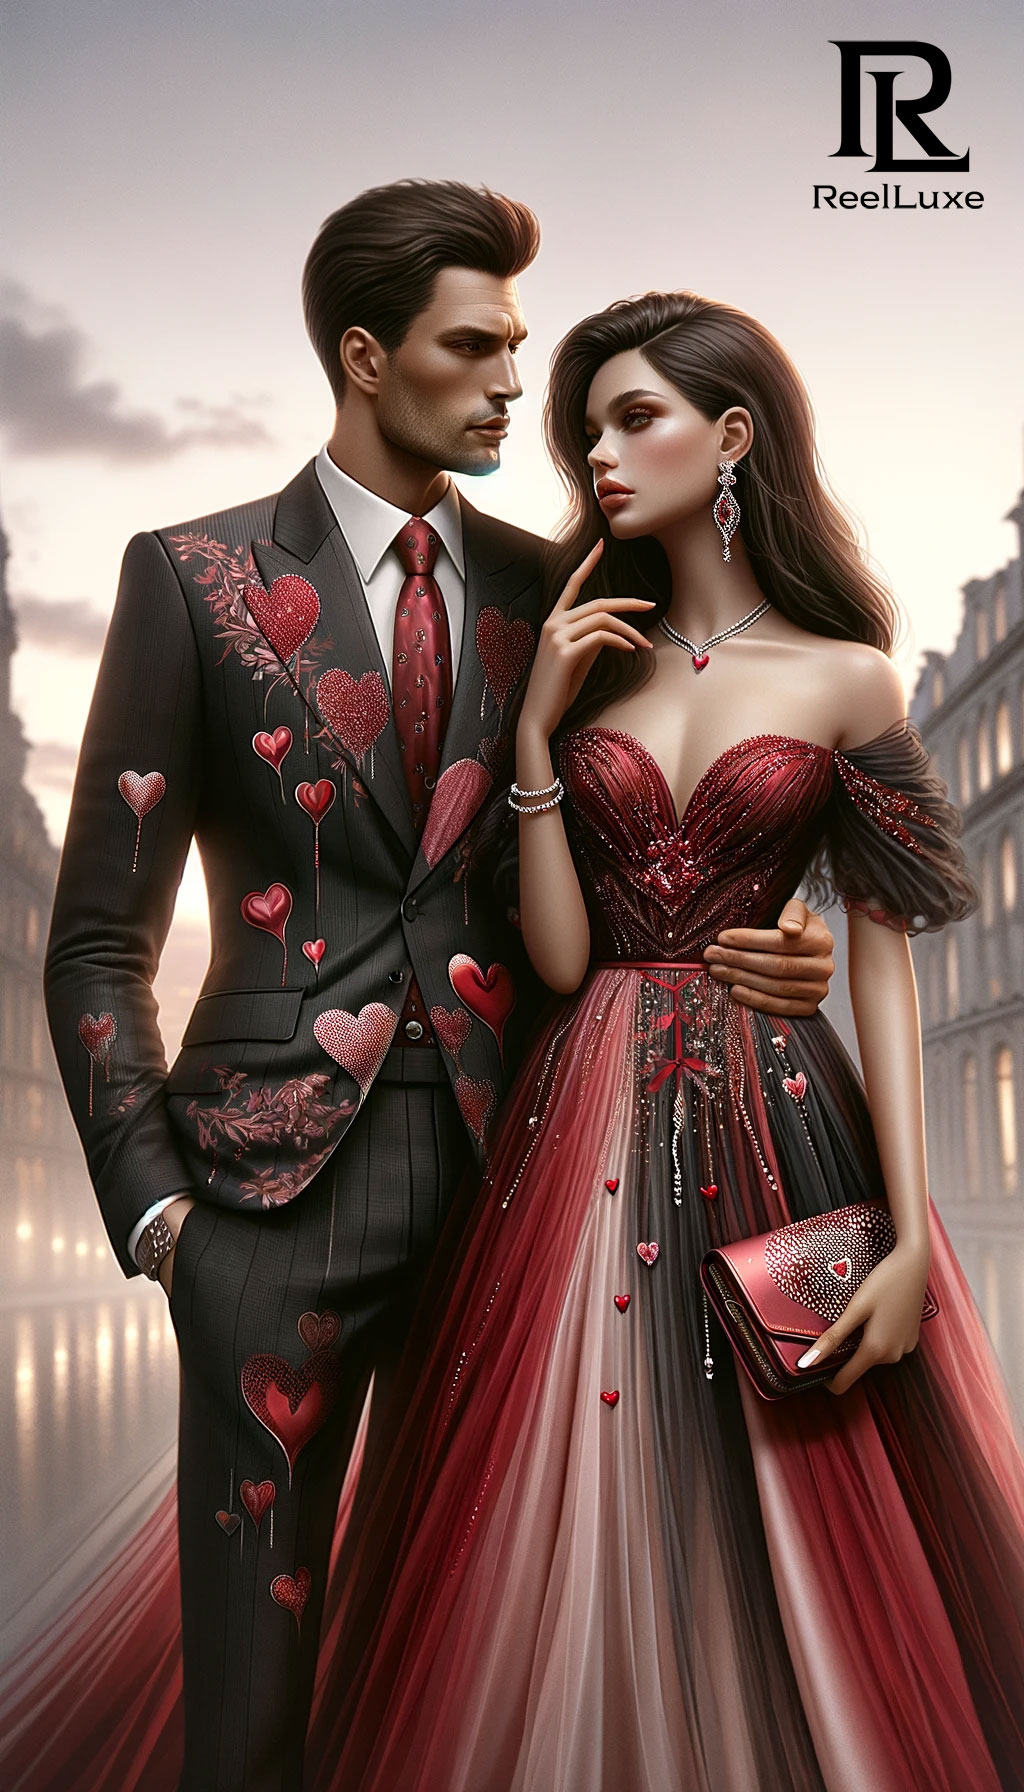 Romance in the Air - Valentine's Day - Beauty and Fashion - 6